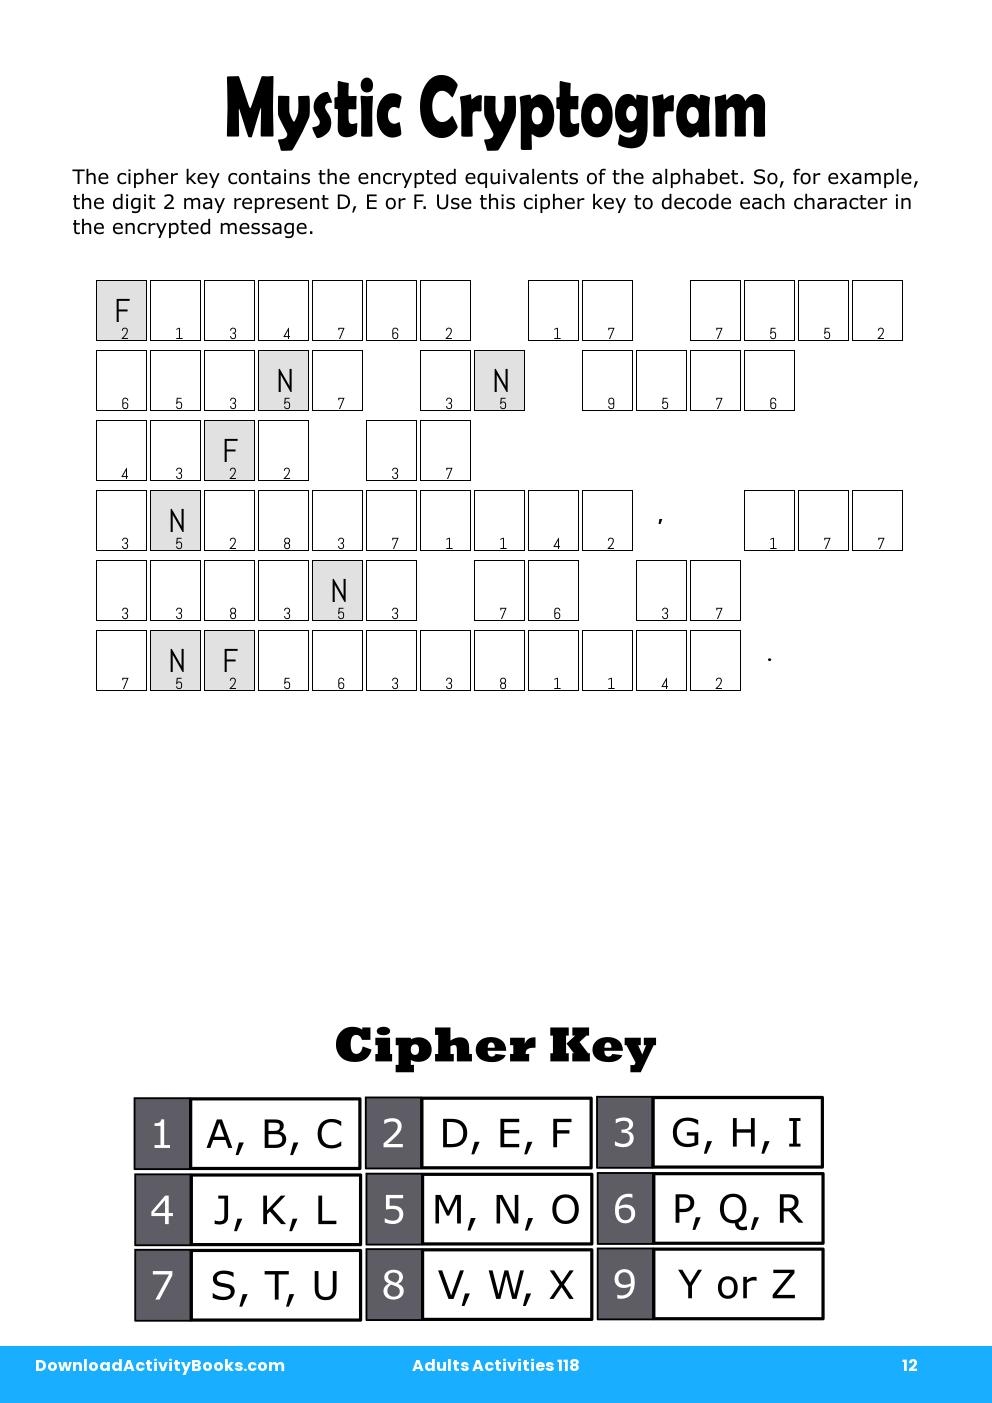 Mystic Cryptogram in Adults Activities 118